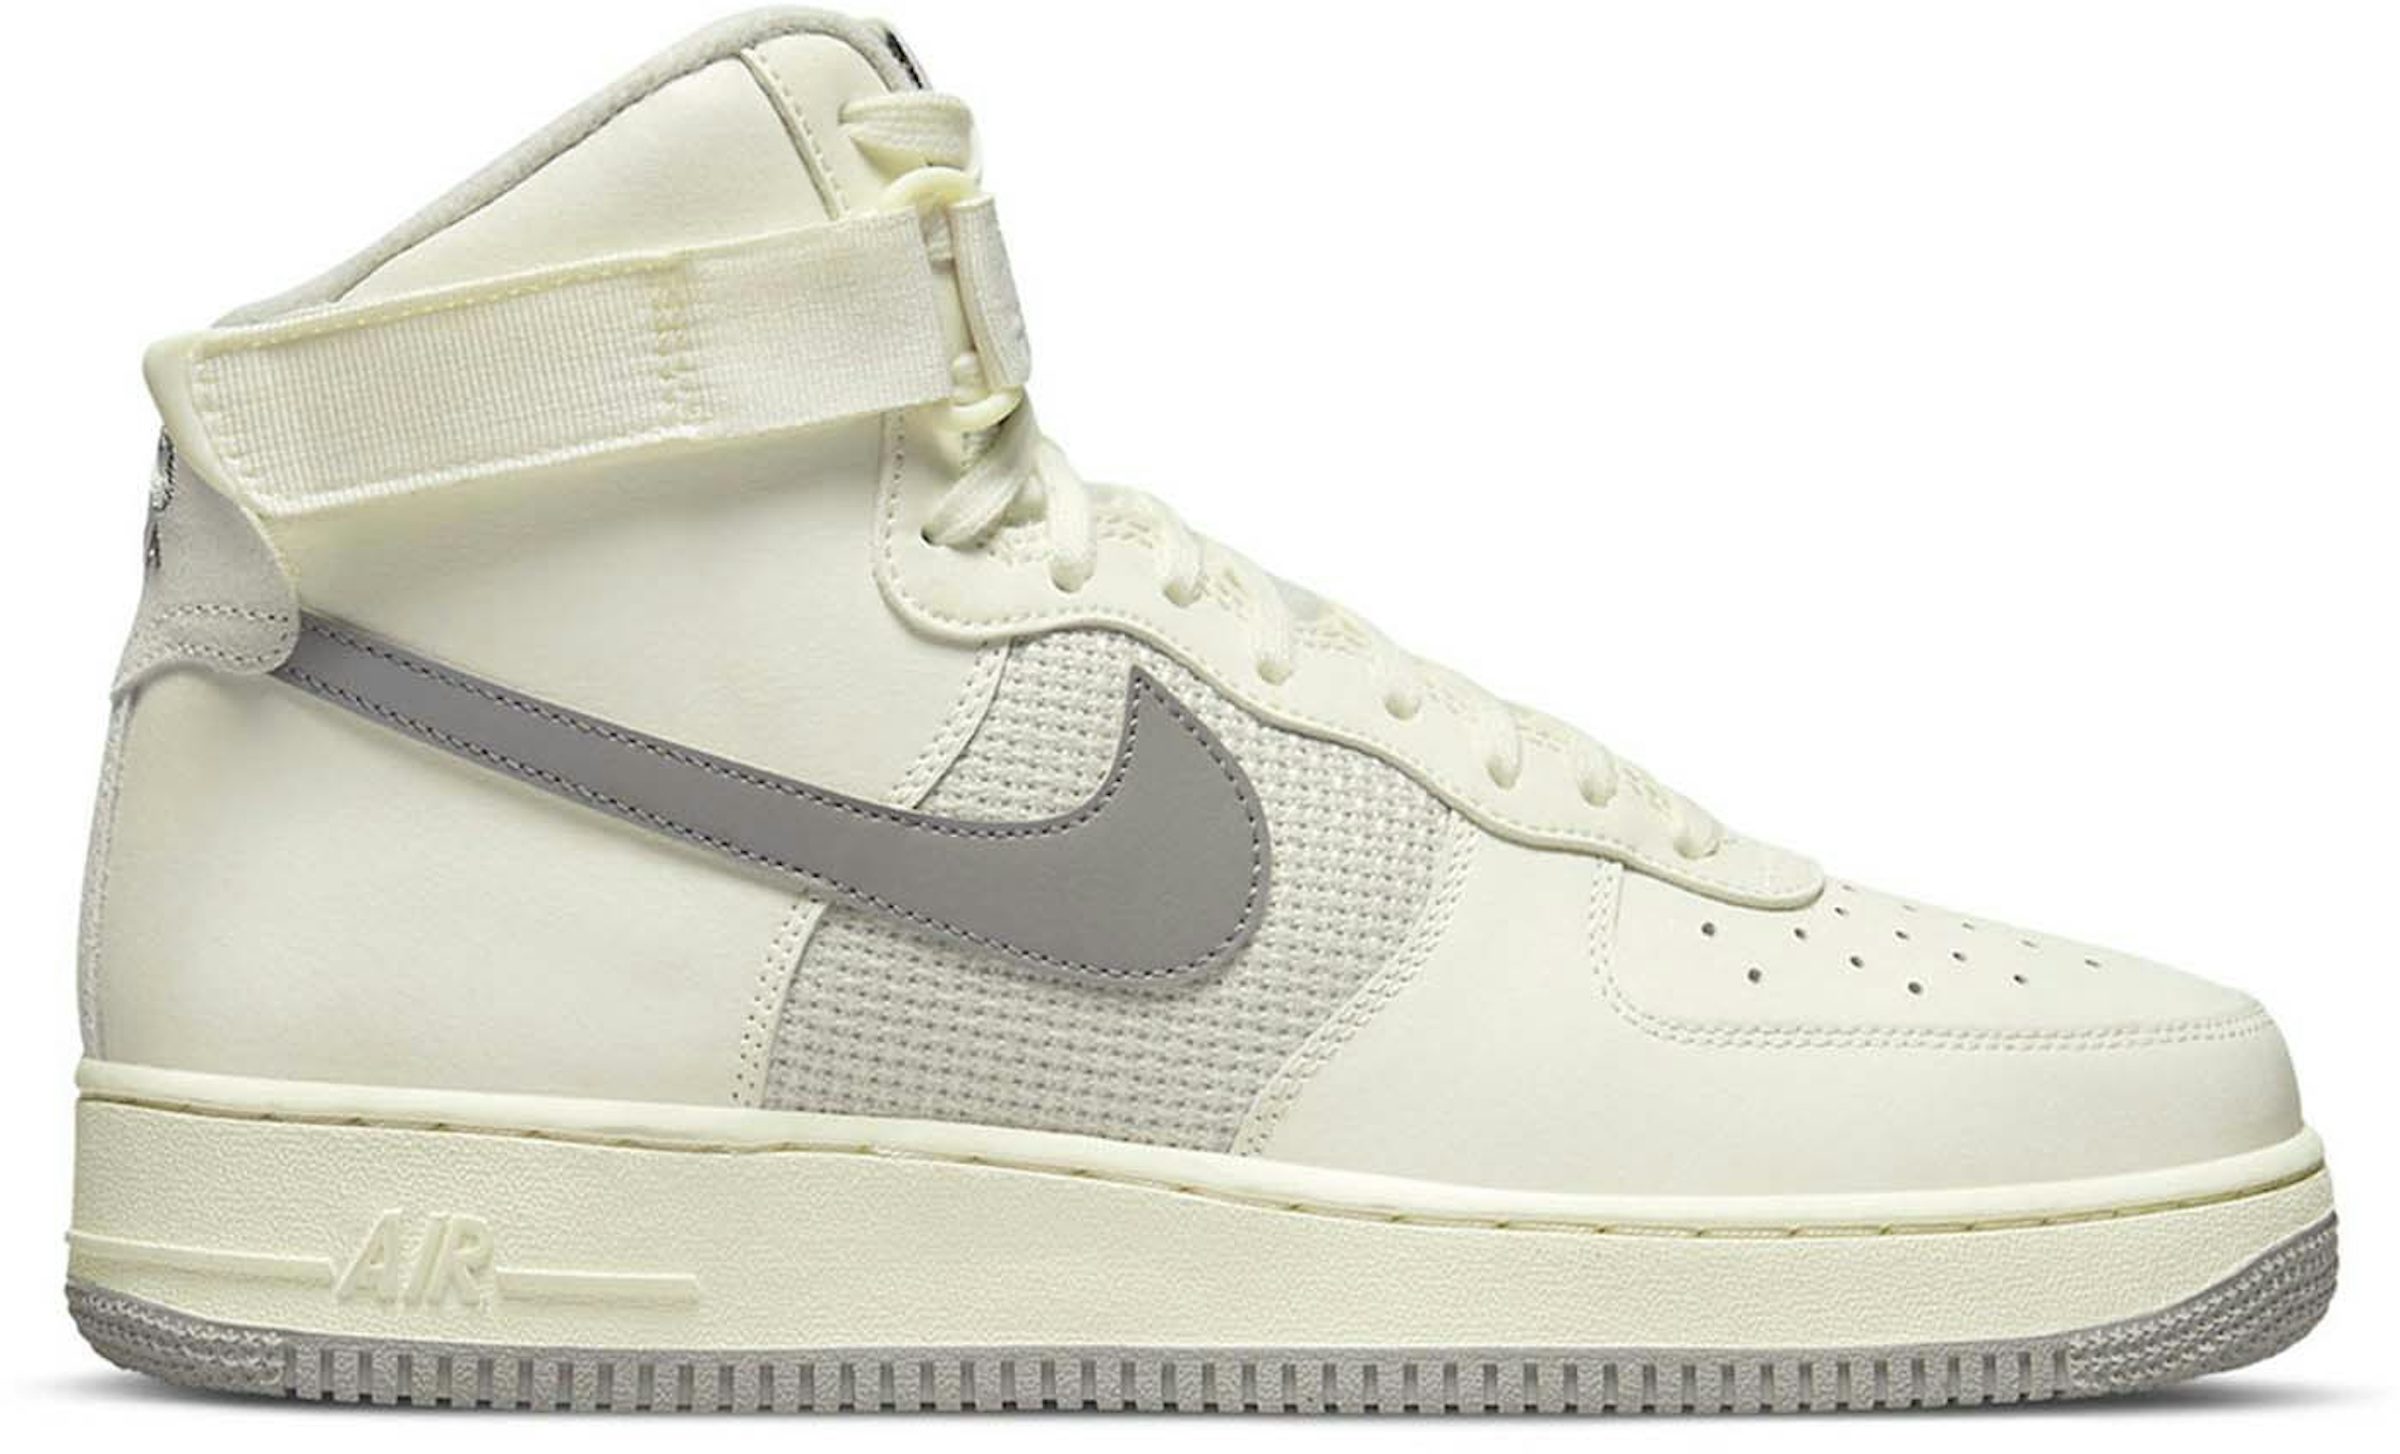 New Men's Nike Air Force 1 High '07 LV8 Shoes~Sail/Grey (DM0209-100) Size 13